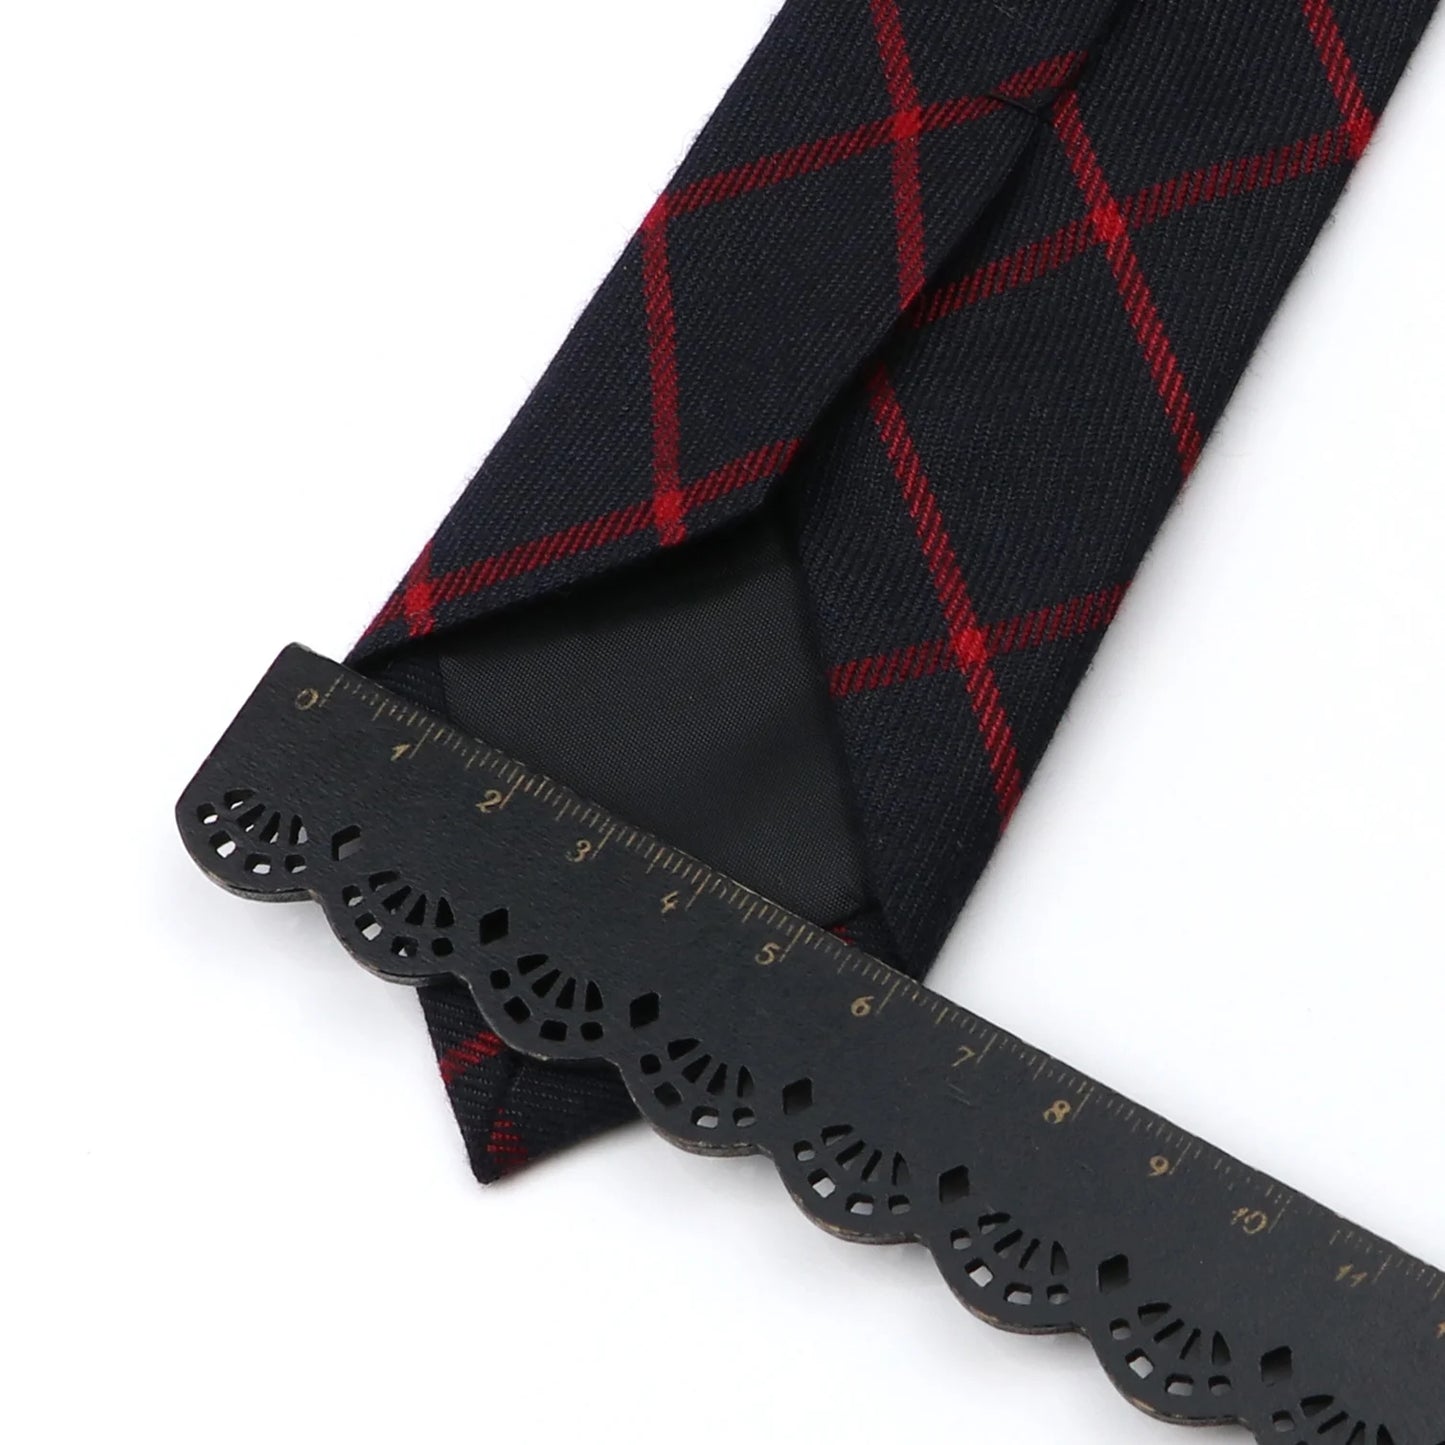 Classic Plaid Cotton Necktie: 6cm Slim Fashion Tie for Men's Tuxedo Suit, Ideal for Parties, Business, and Casual Occasions, Perfect Gift